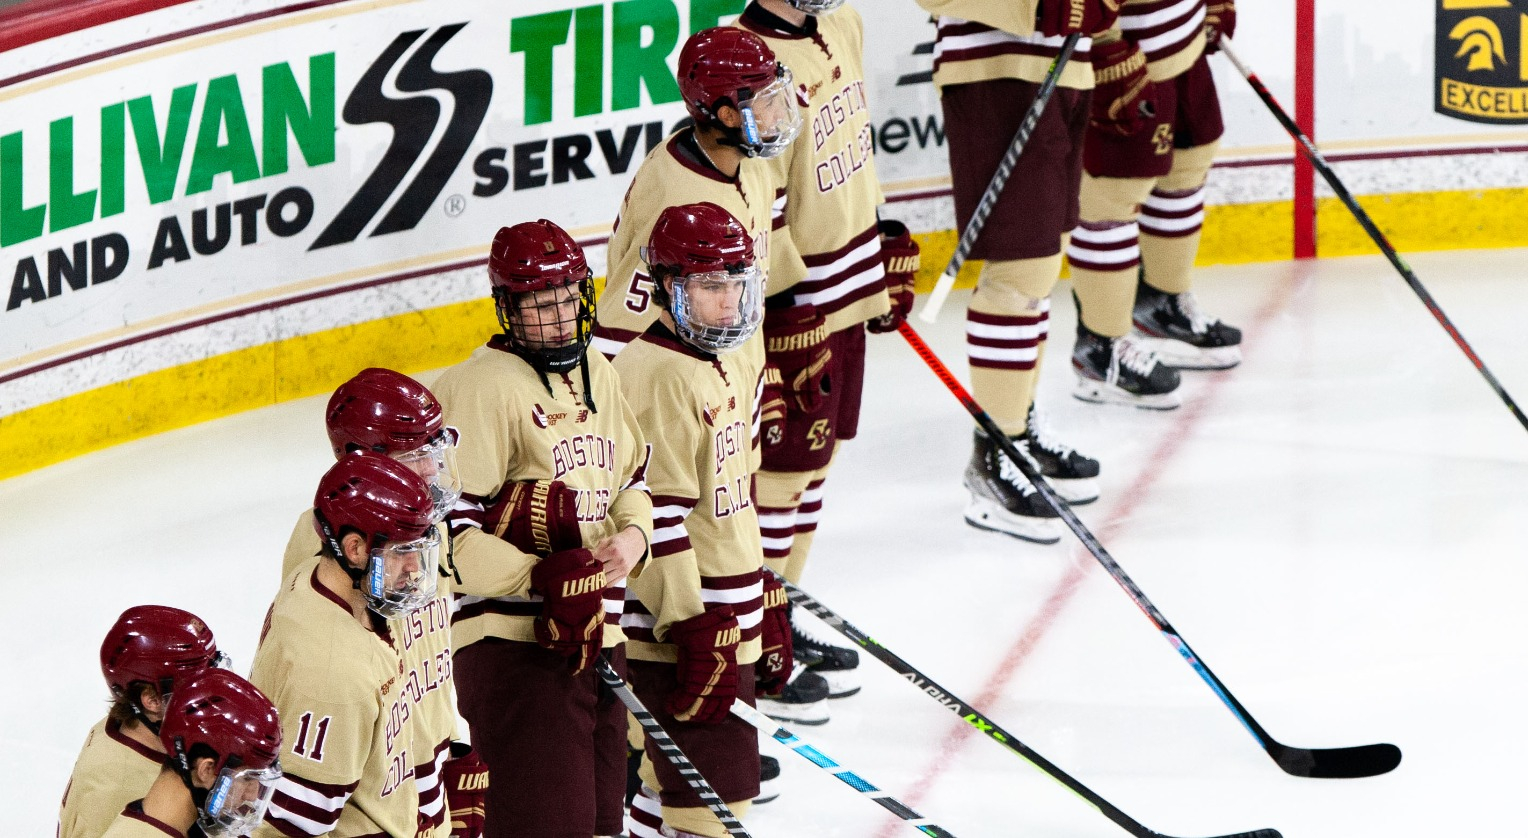 Greg Brown Hired to be Next Head Coach of Boston College Men’s Hockey